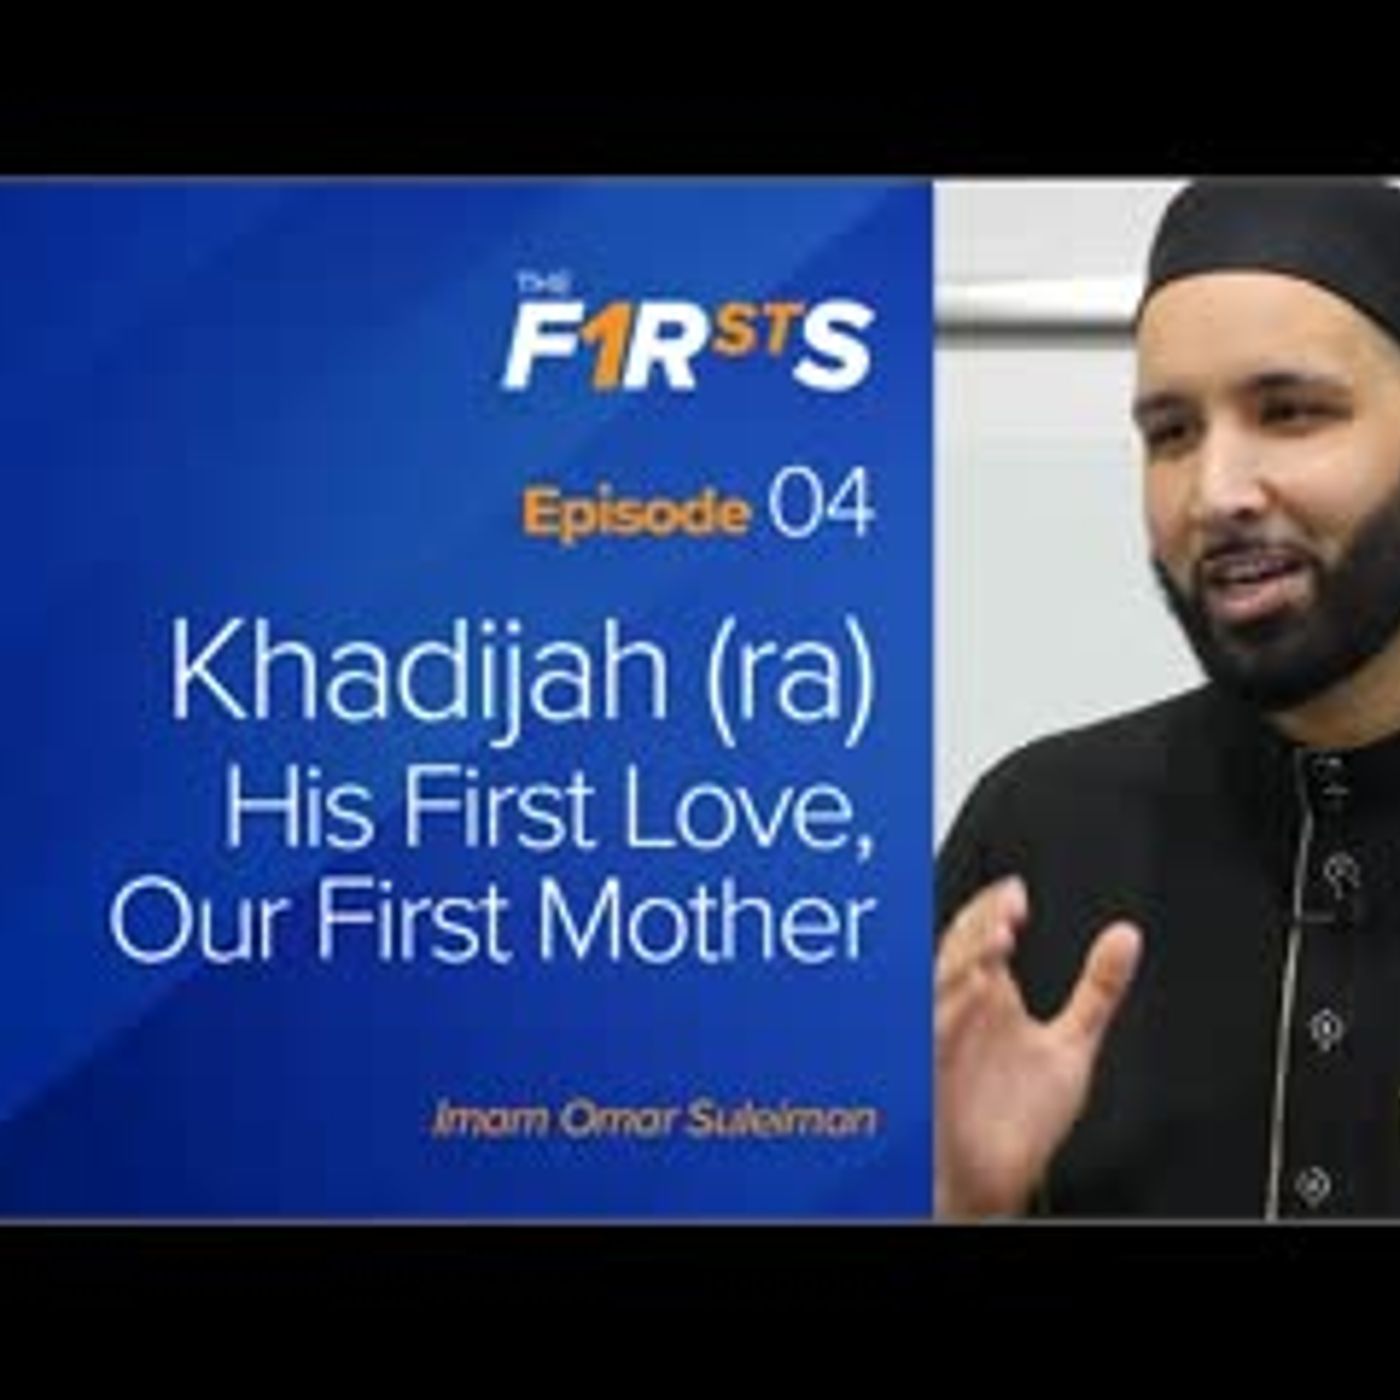 Khadijah (ra) His First Love, Our First Mother   The Firsts   Dr. Omar Suleiman